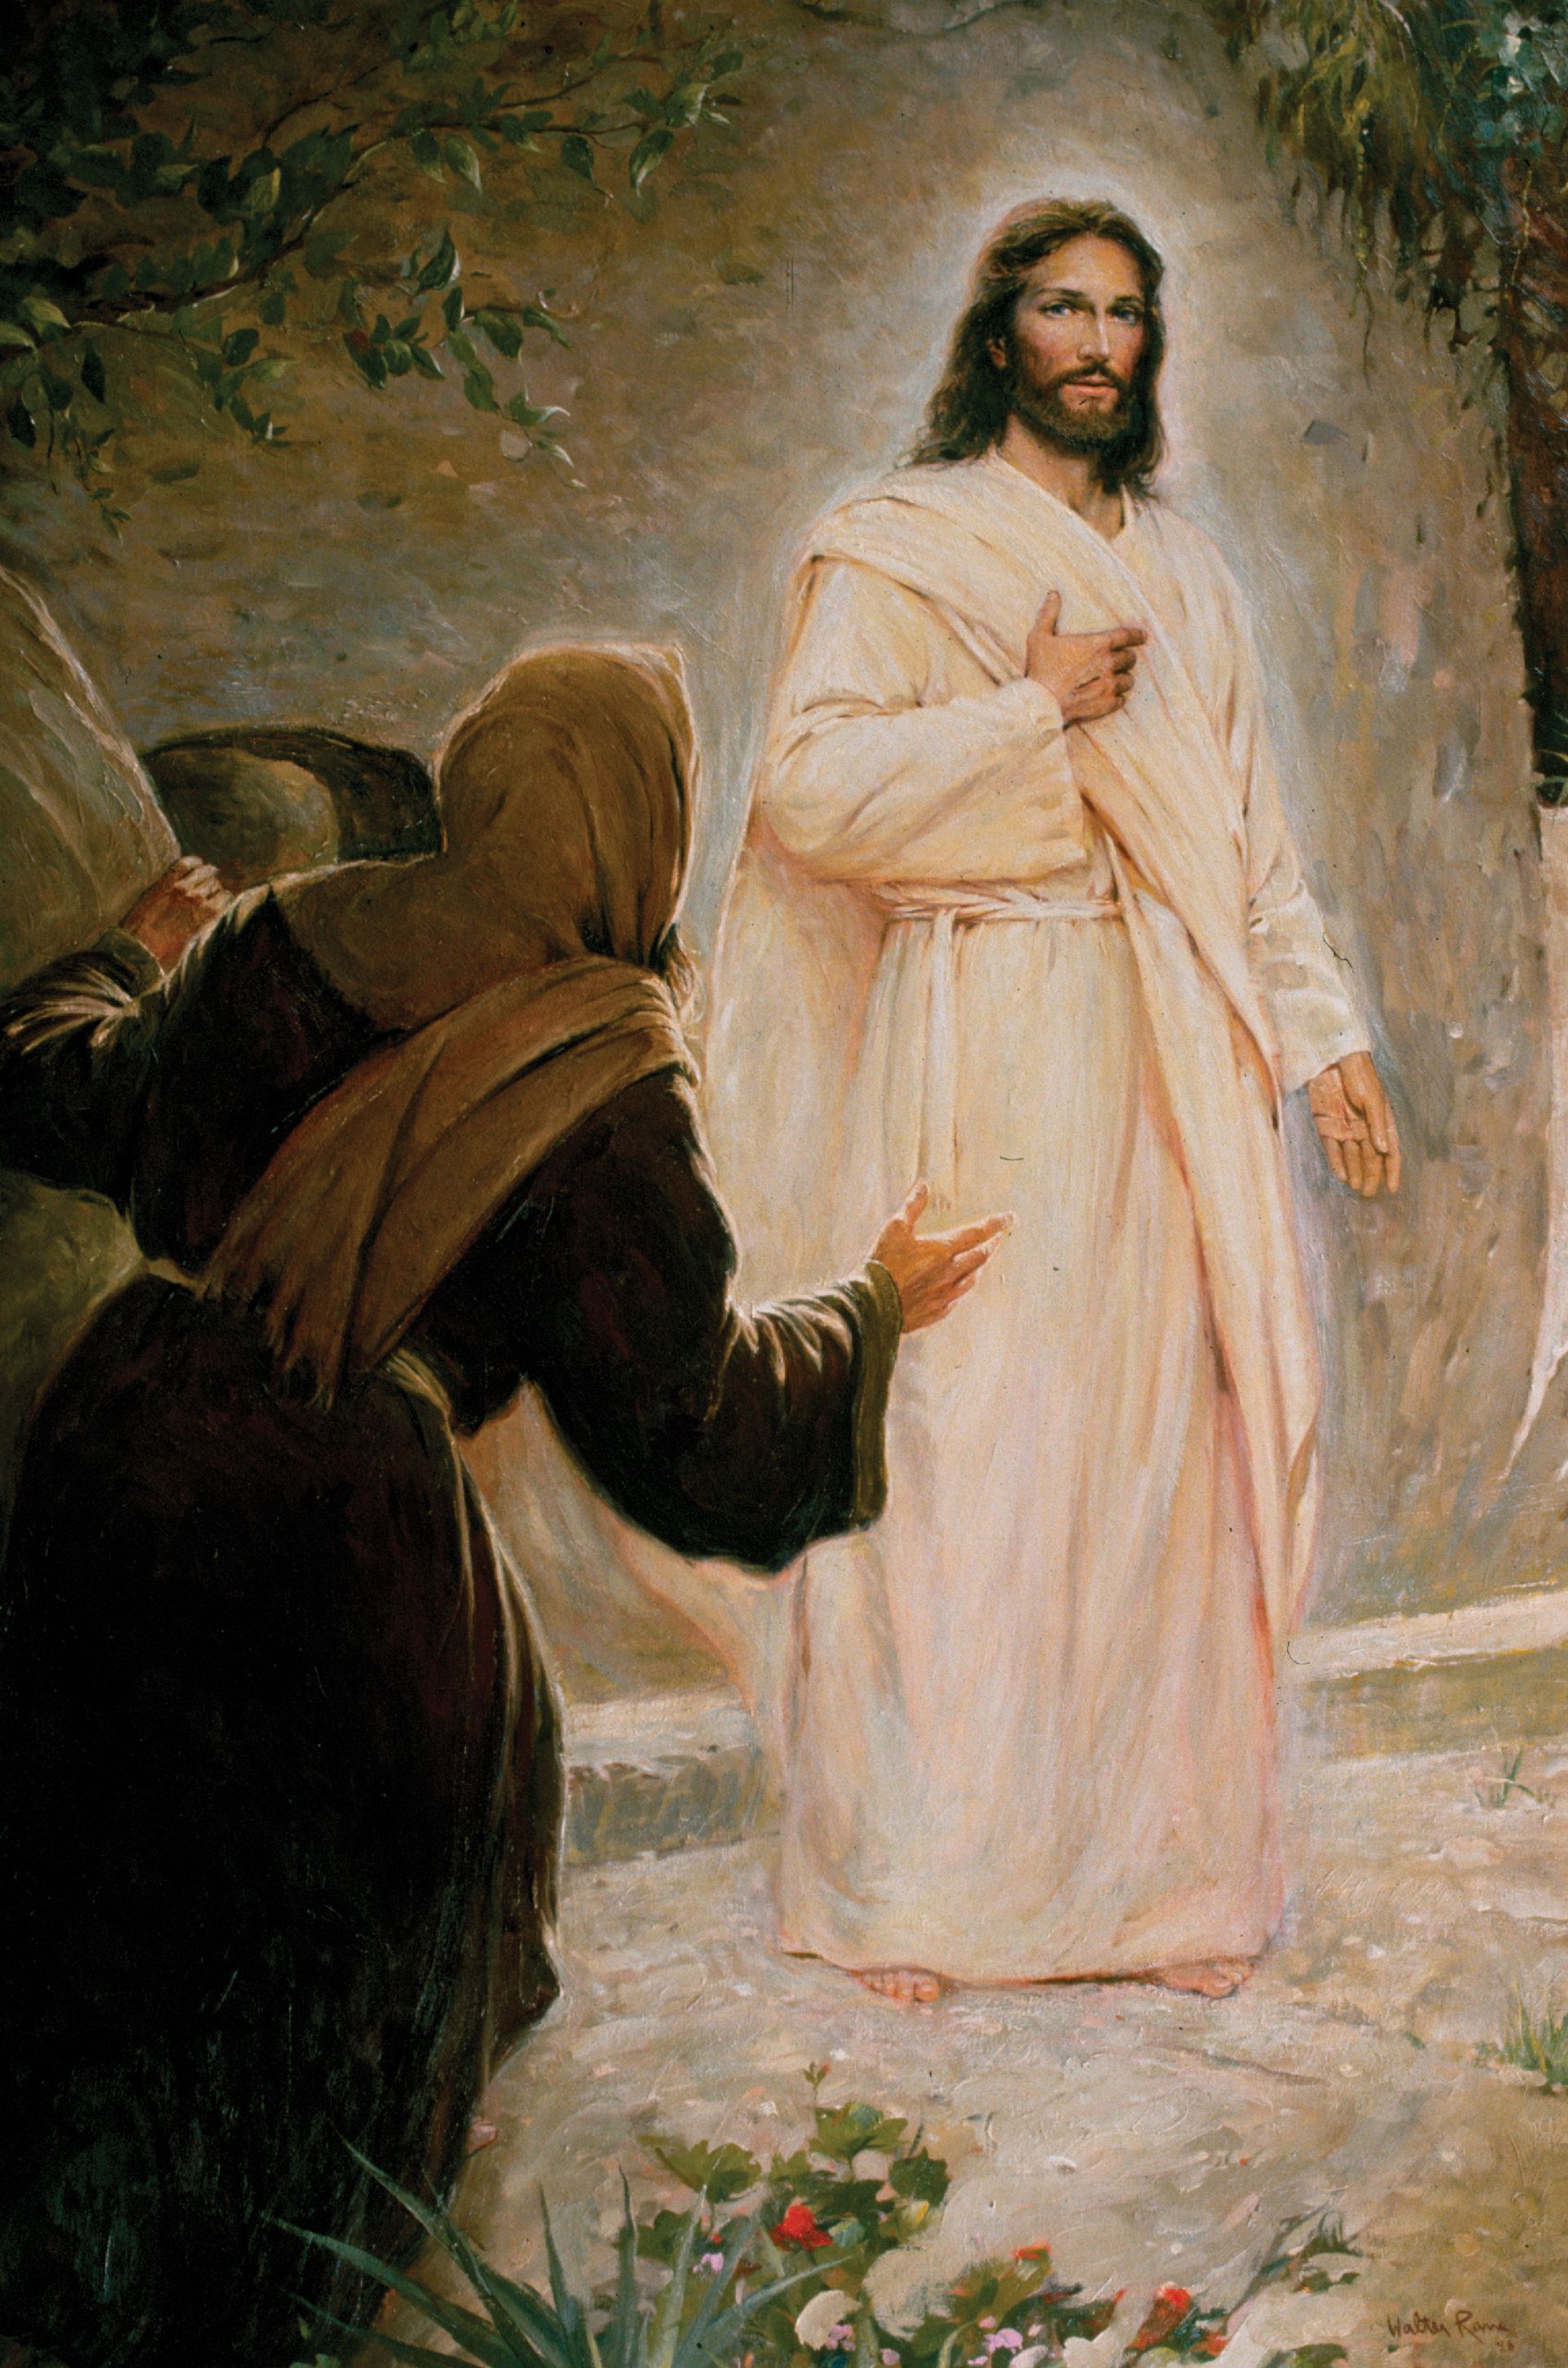 The Resurrected Christ, by Walter Rane